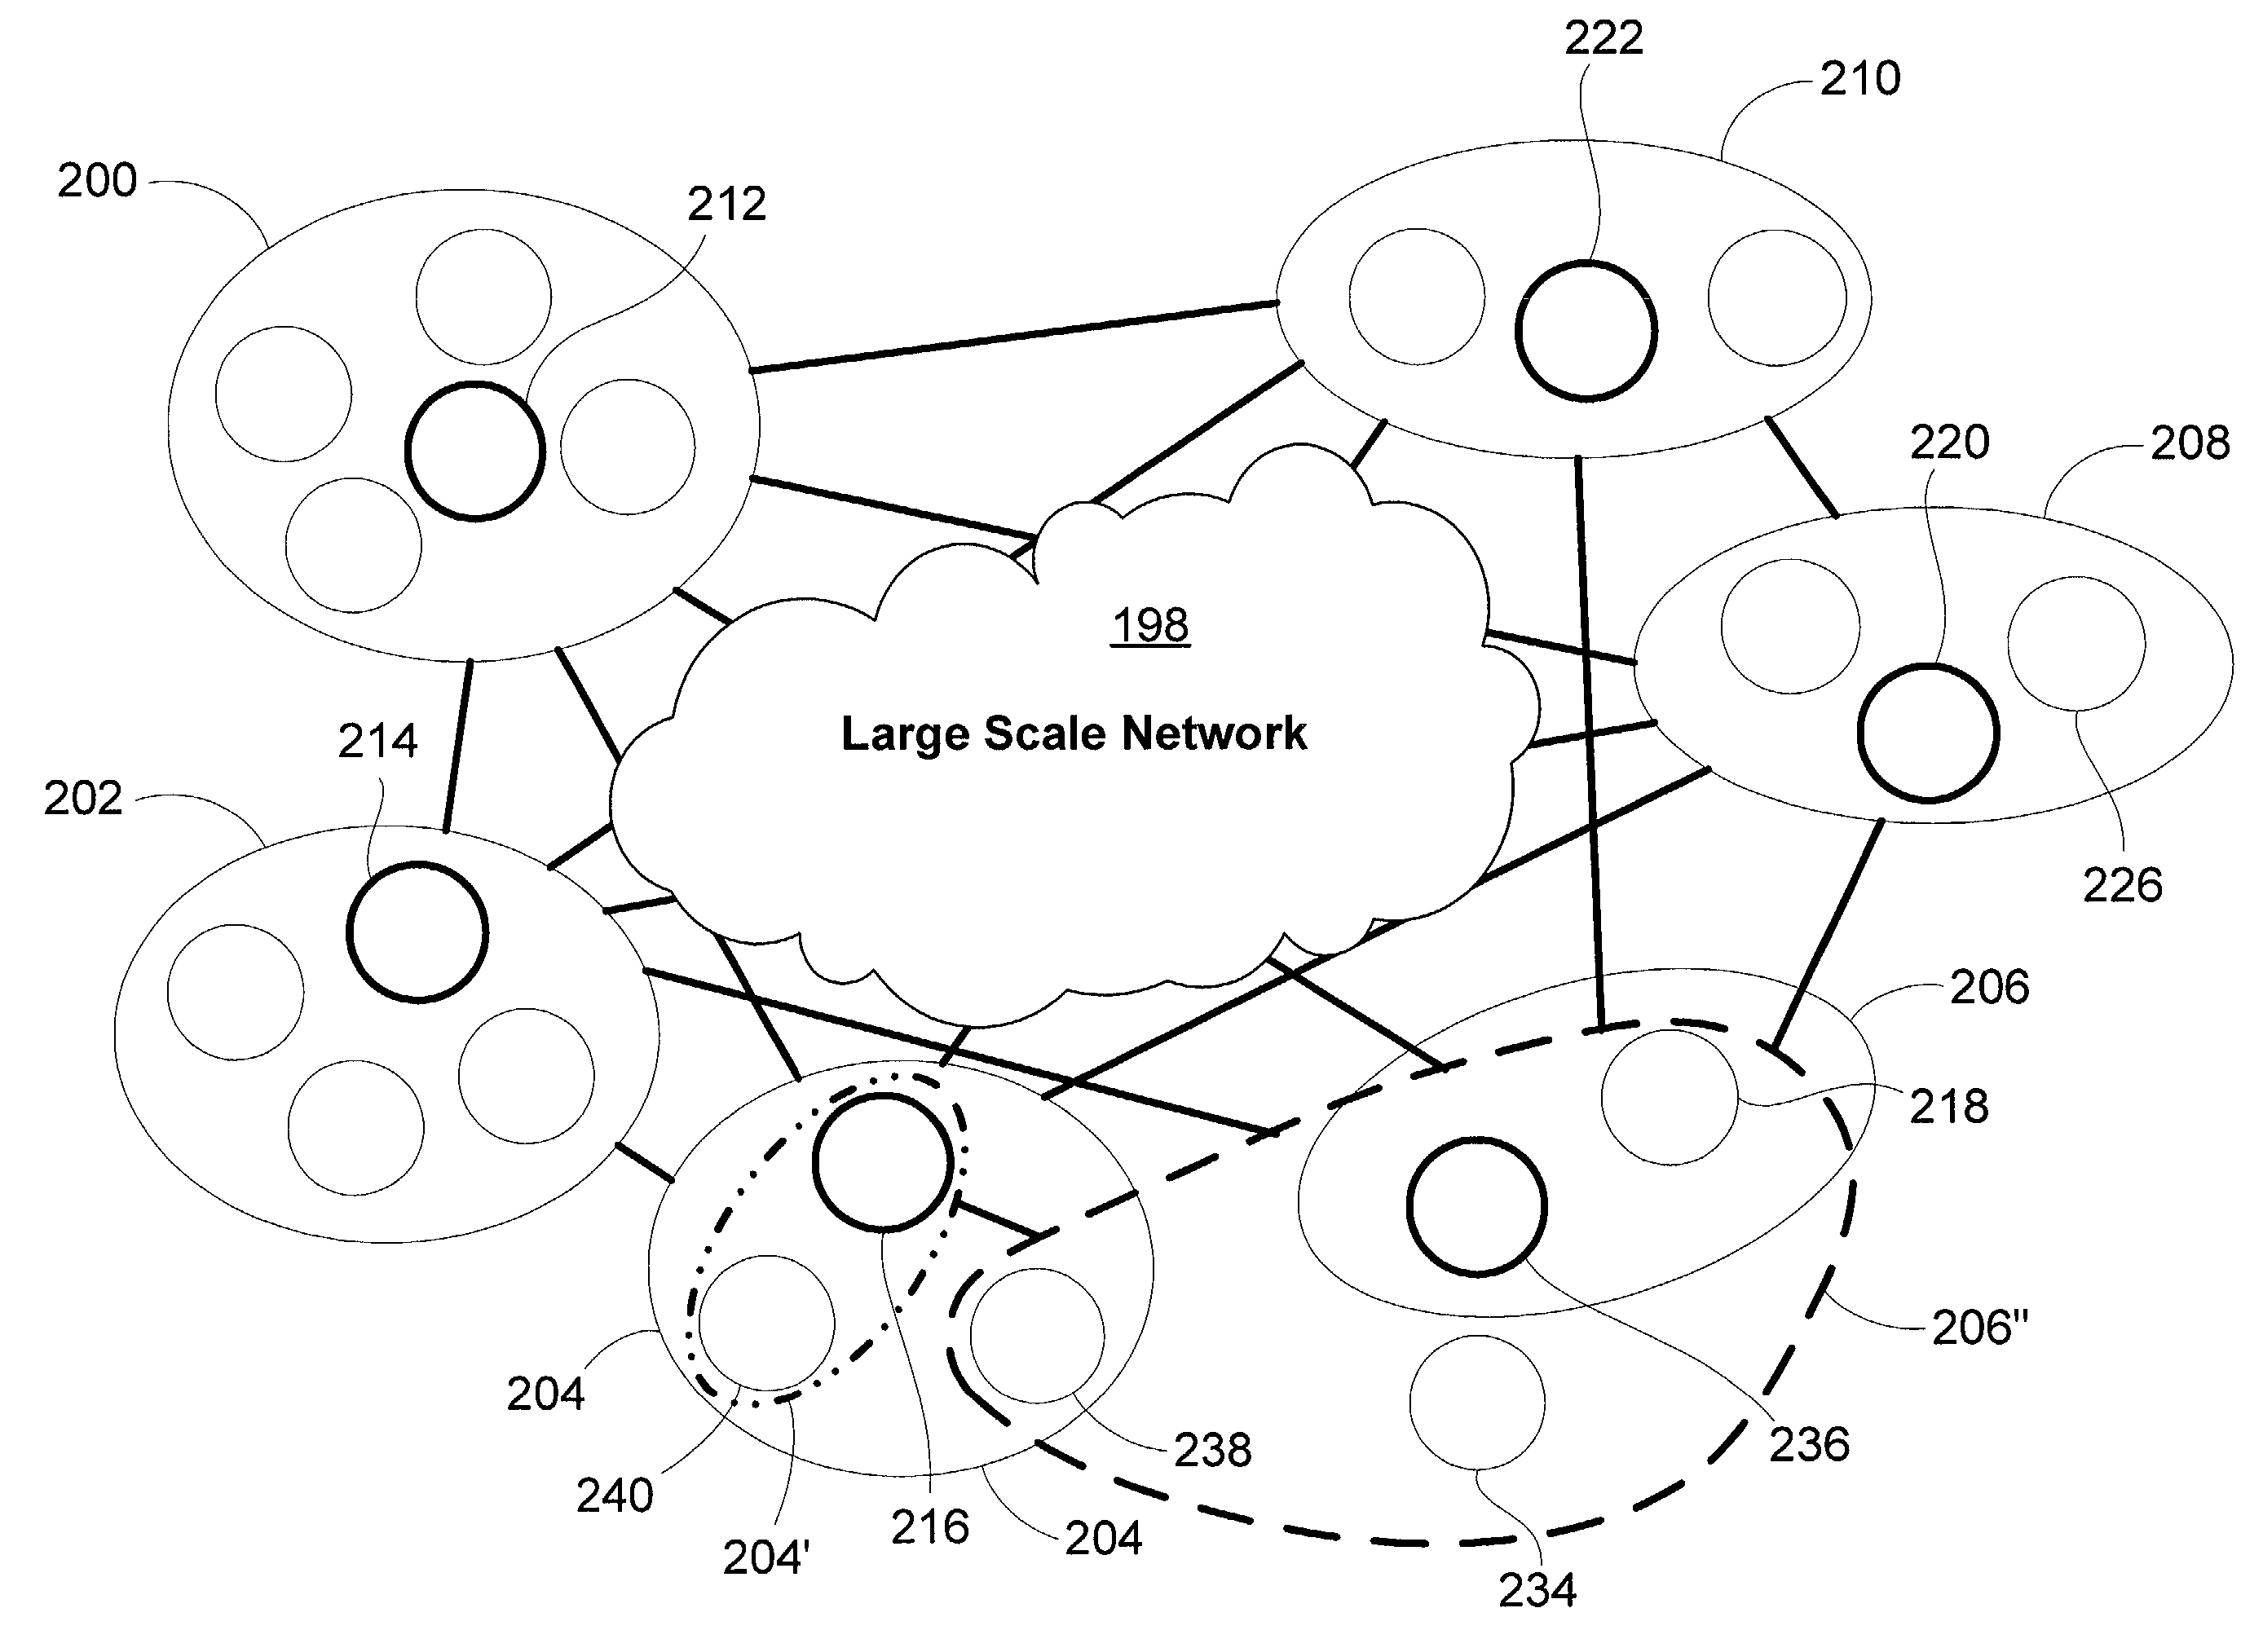 Peer-to-peer based network performance measurement and analysis system and method for large scale networks